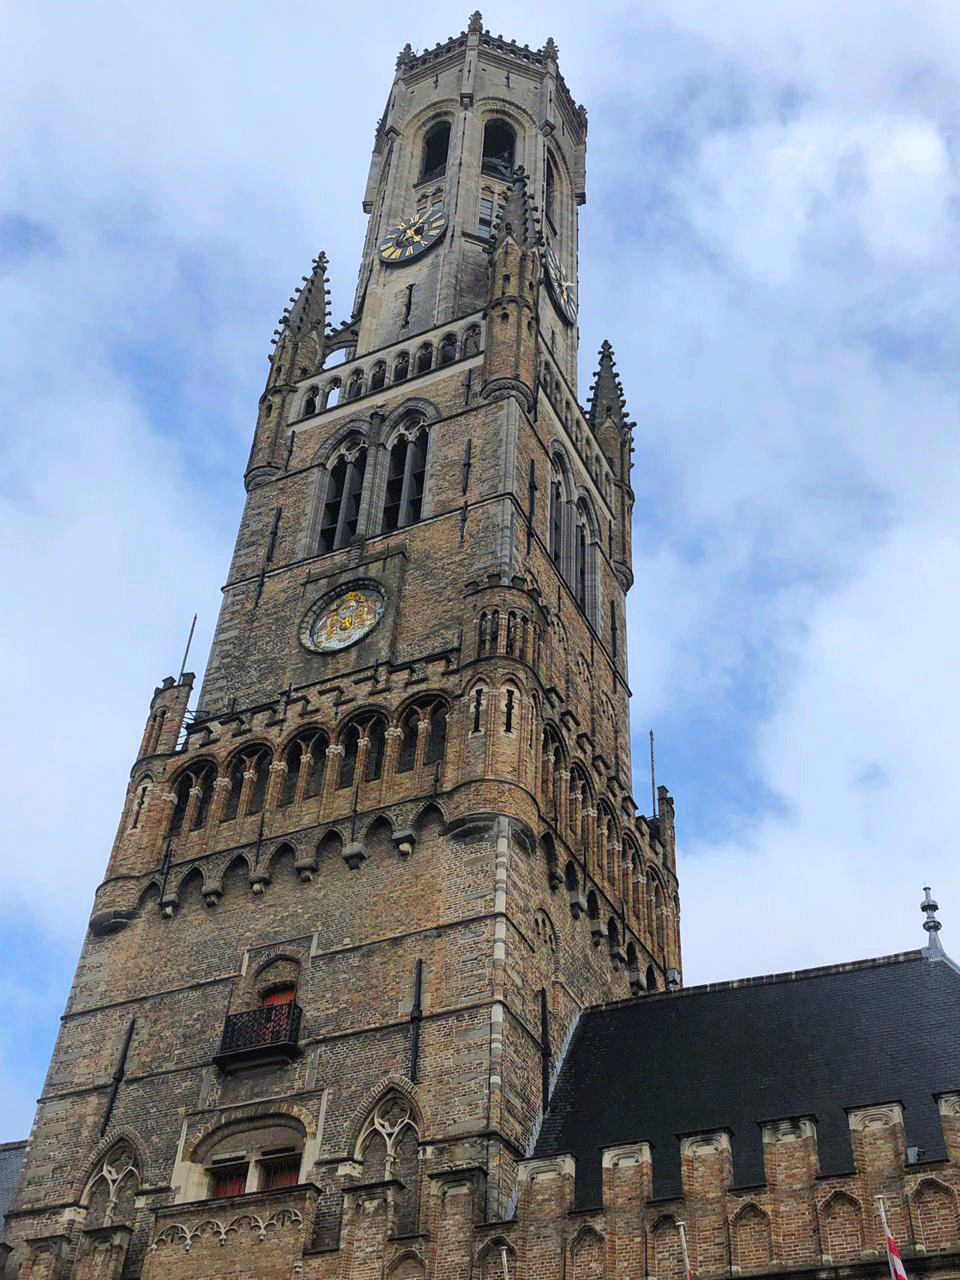 The belfry of Bruges towers impressively upto the sky while musicians play under its vaulted arches.